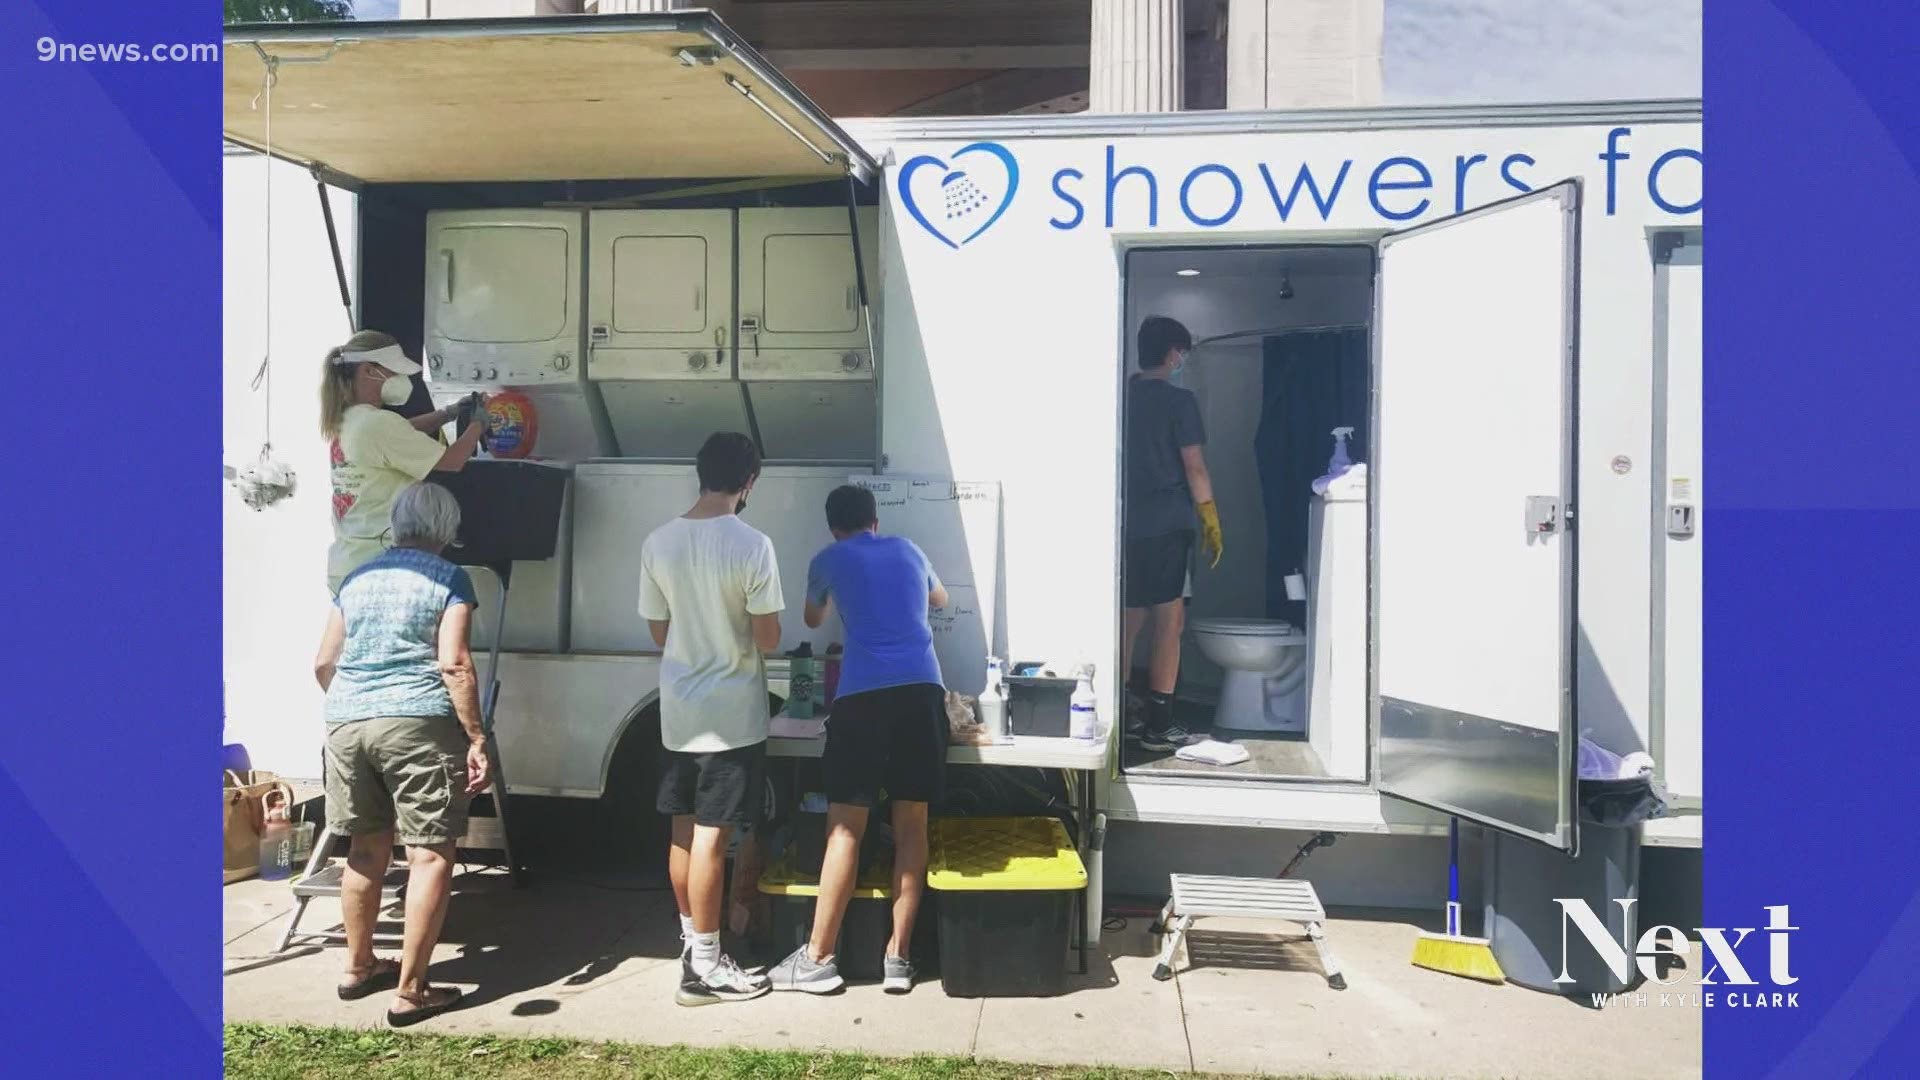 Showers for All's trailer goes around Denver so that people who are homeless can get clean. With our help, they can add a second trailer.